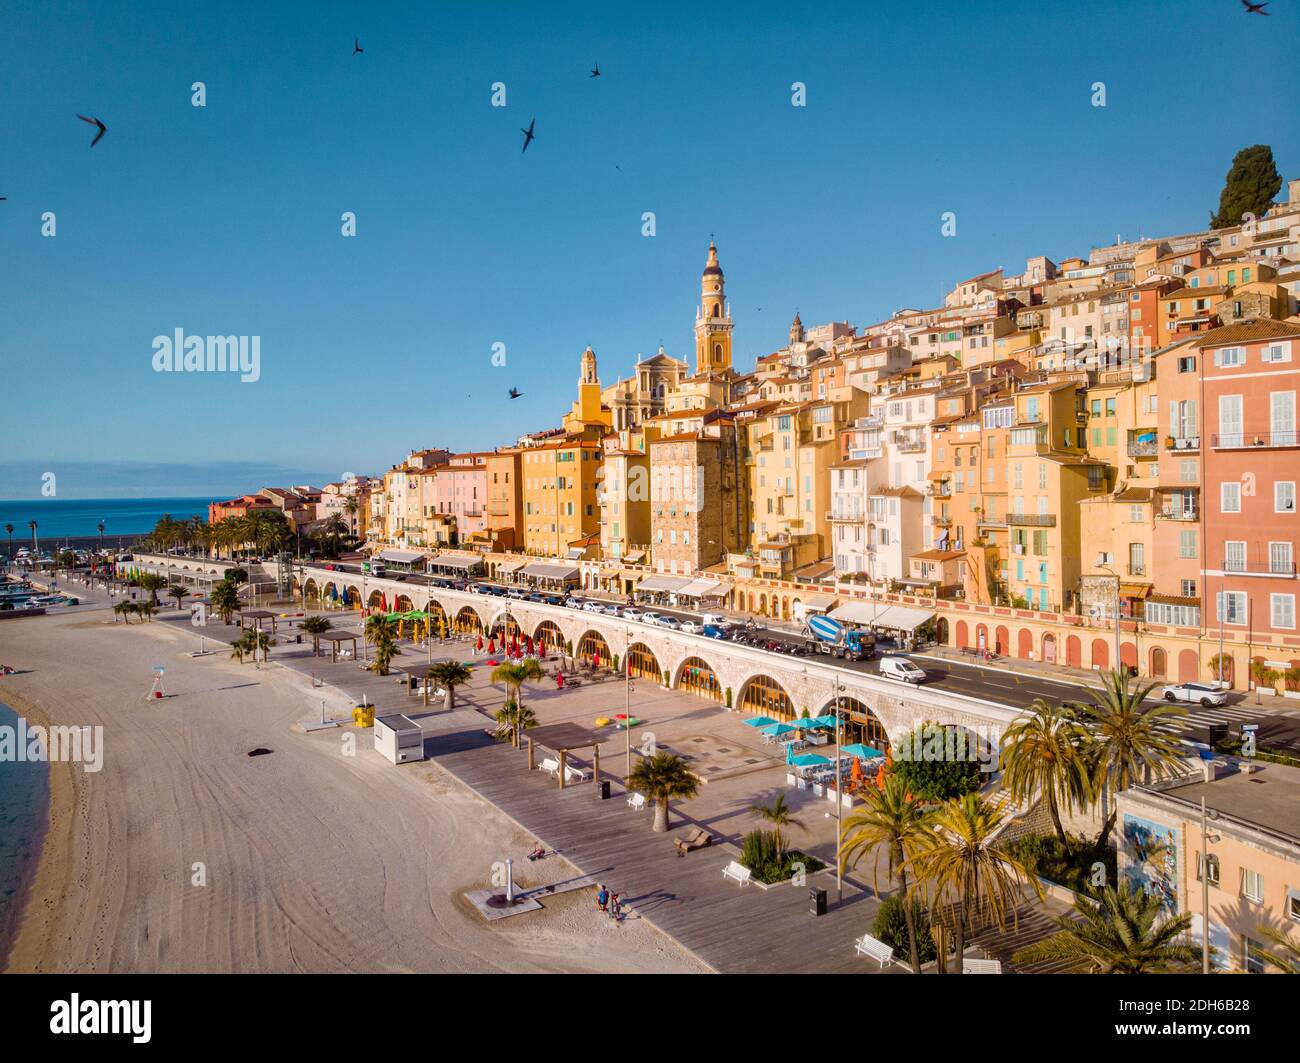 View on old part of Menton, Provence-Alpes-Cote d'Azur, France. Stock Photo